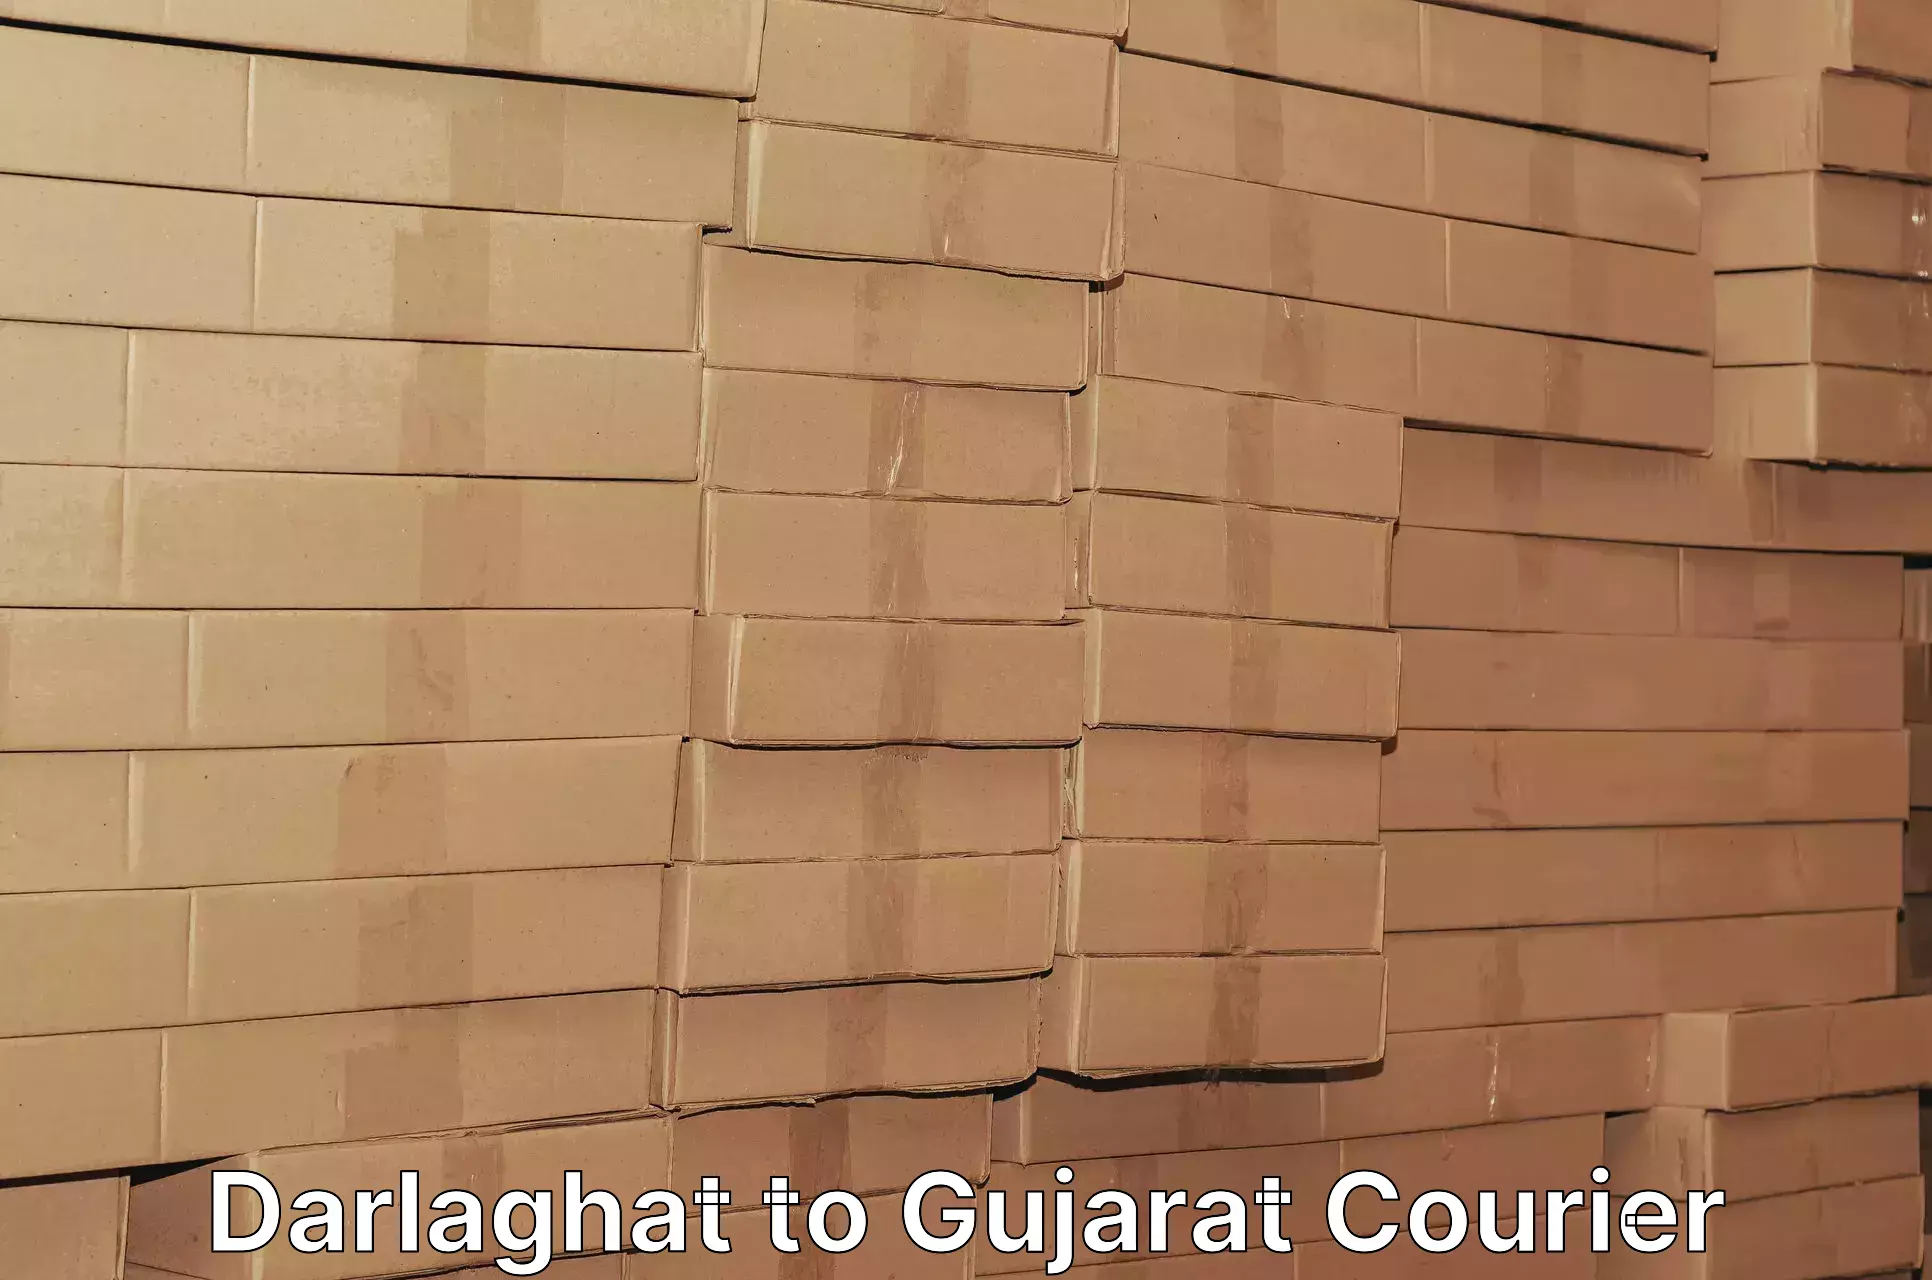 Courier rate comparison Darlaghat to Ahmedabad